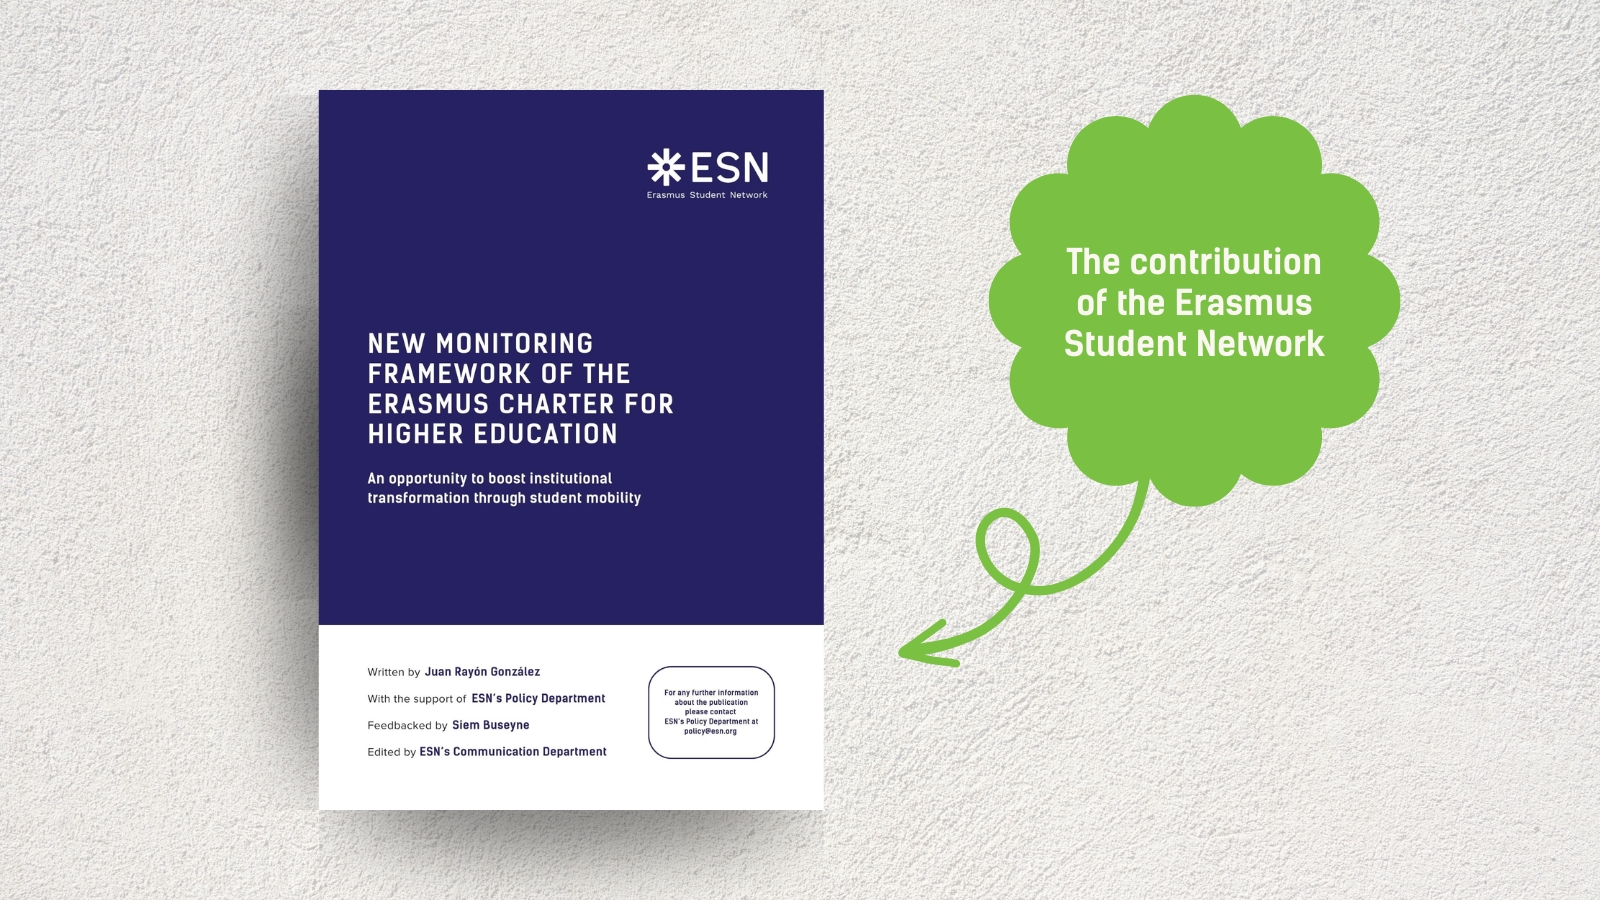 Cover of book about New monitoring framework of the Erasmus Charter for Higher Education